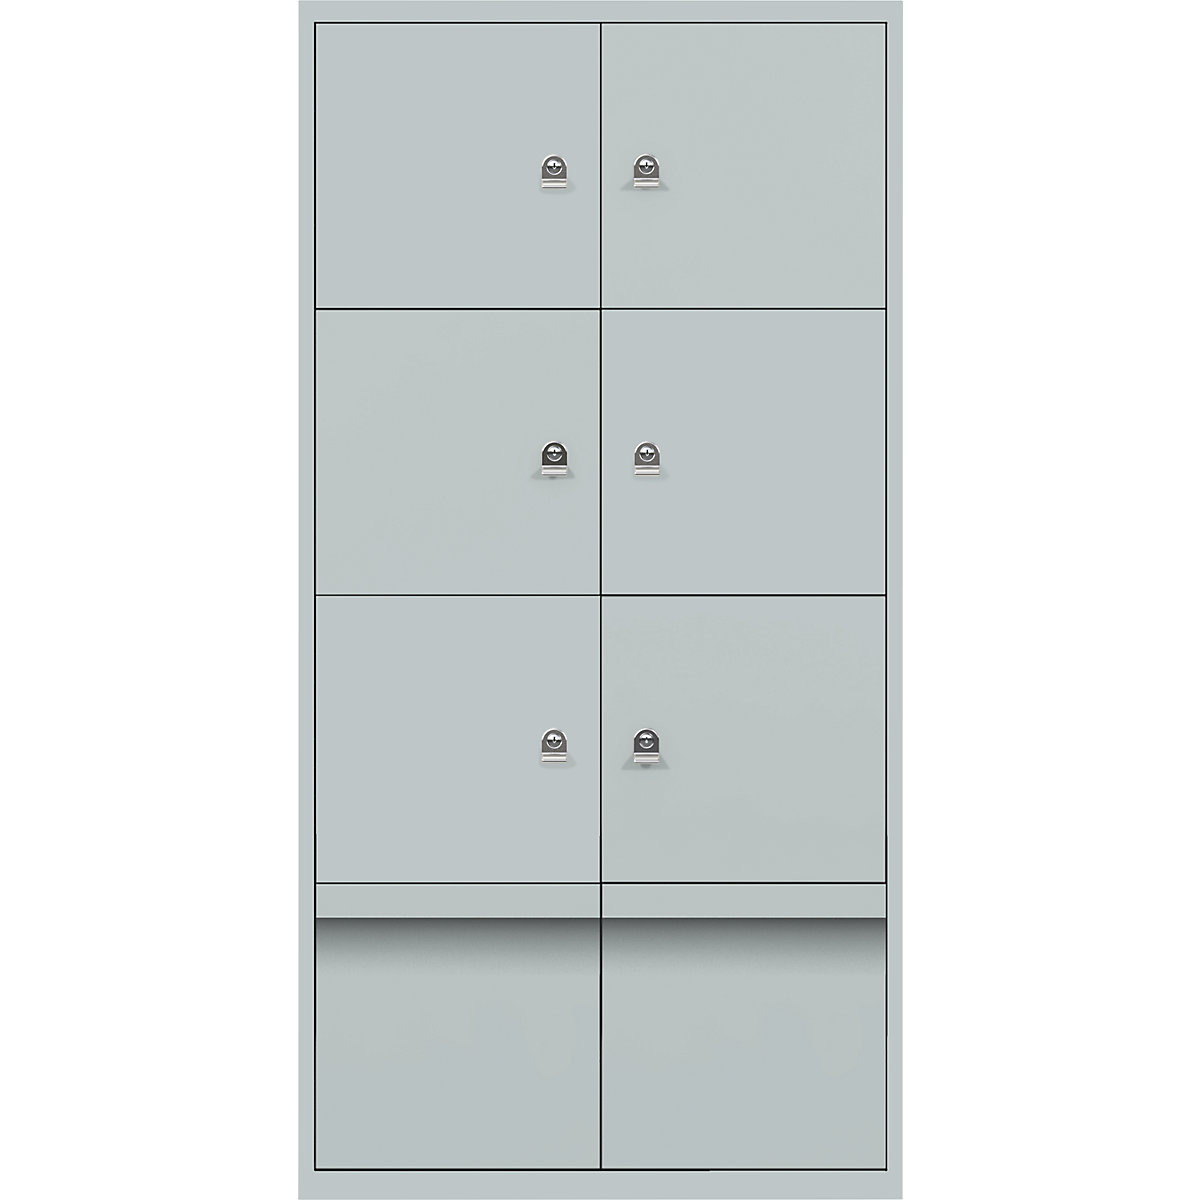 BISLEY – LateralFile™ lodge, with 6 lockable compartments and 2 drawers, height 375 mm each, silver